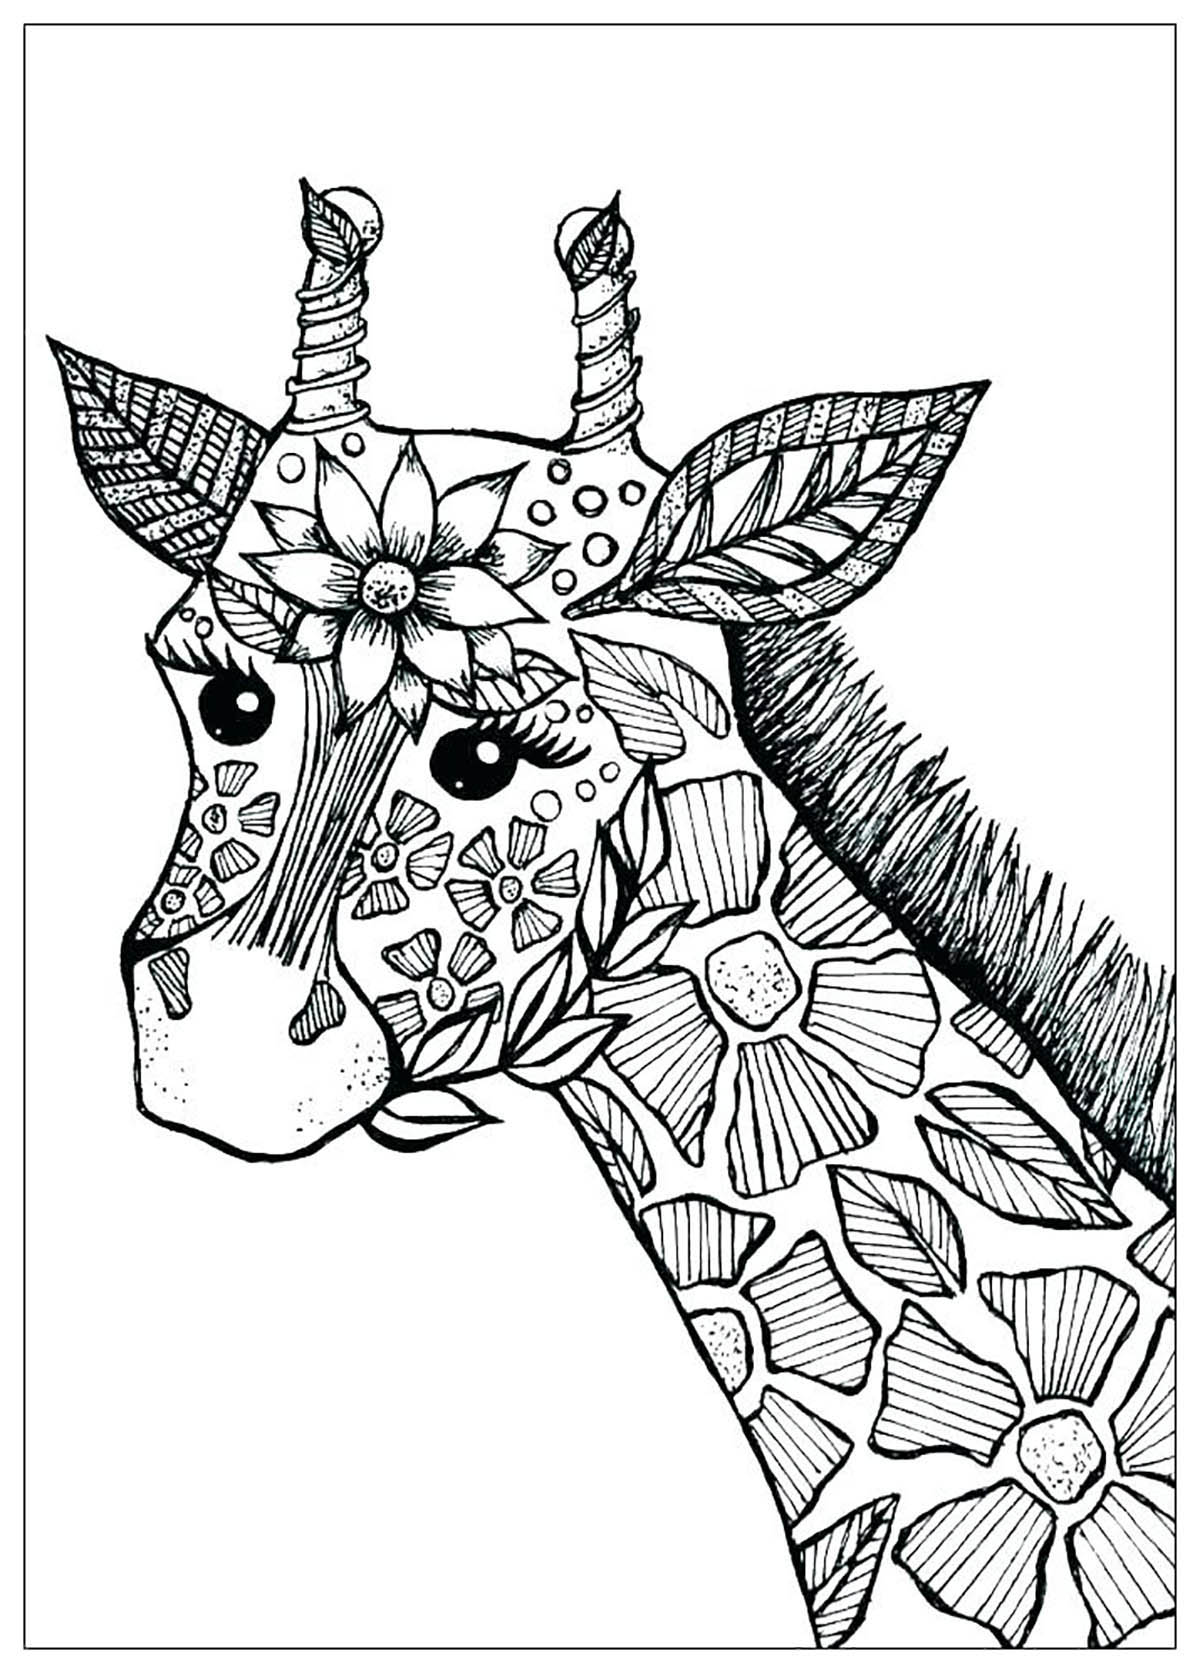 Giraffes to download for free - Giraffes Kids Coloring Pages